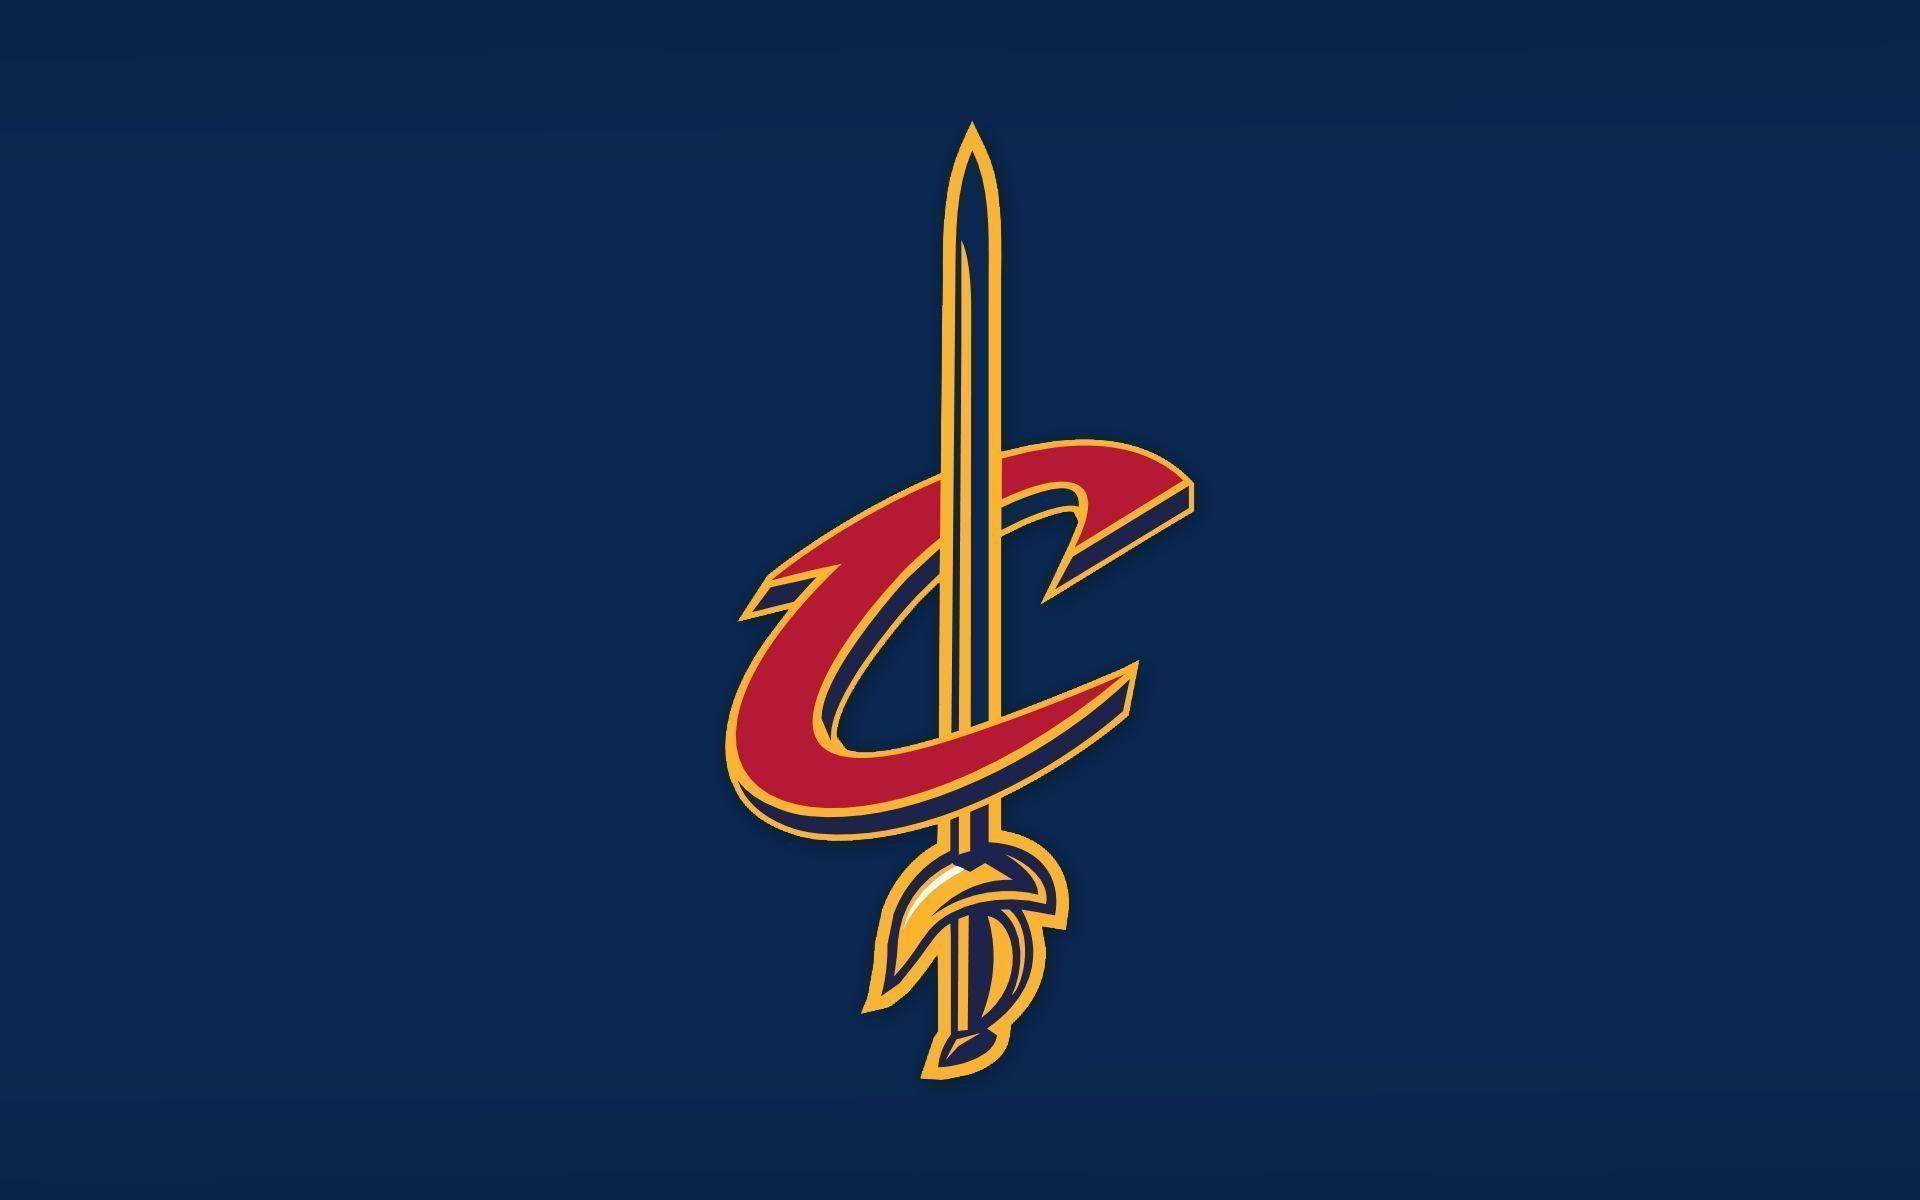 Cleveland Cavaliers Logo Mobile Wallpaper, Cleveland Cavaliers